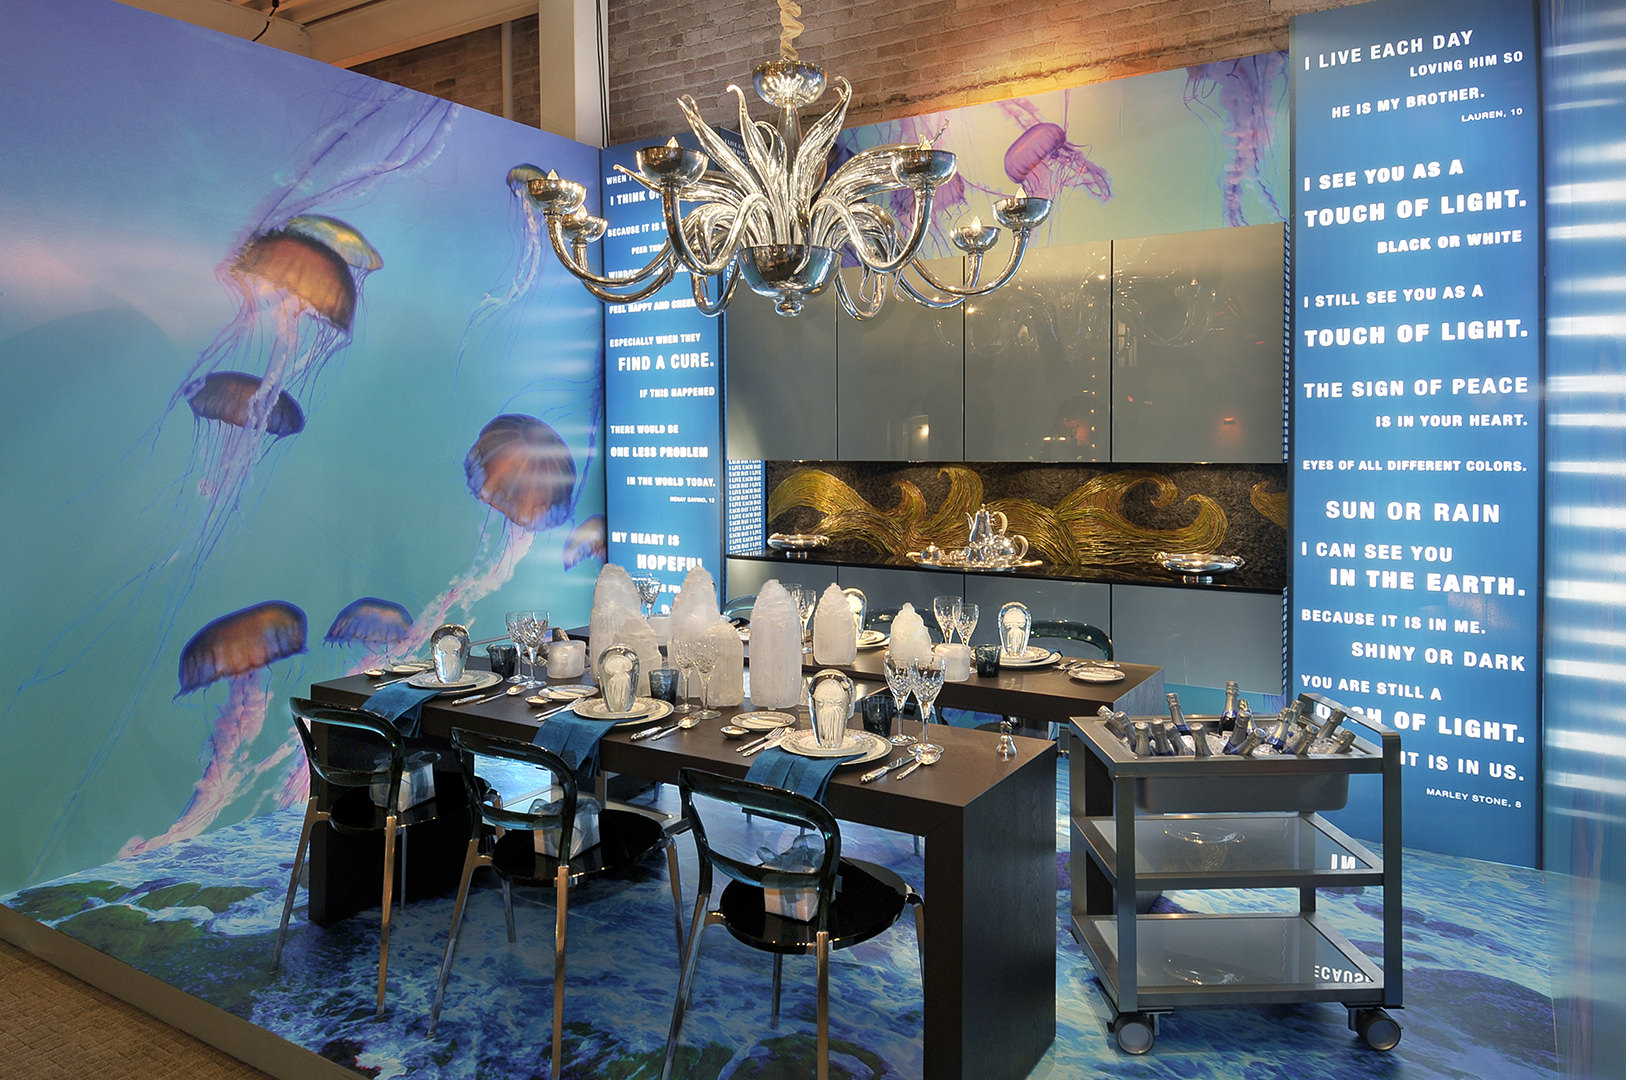 DIFFA’S DINING BY DESIGN